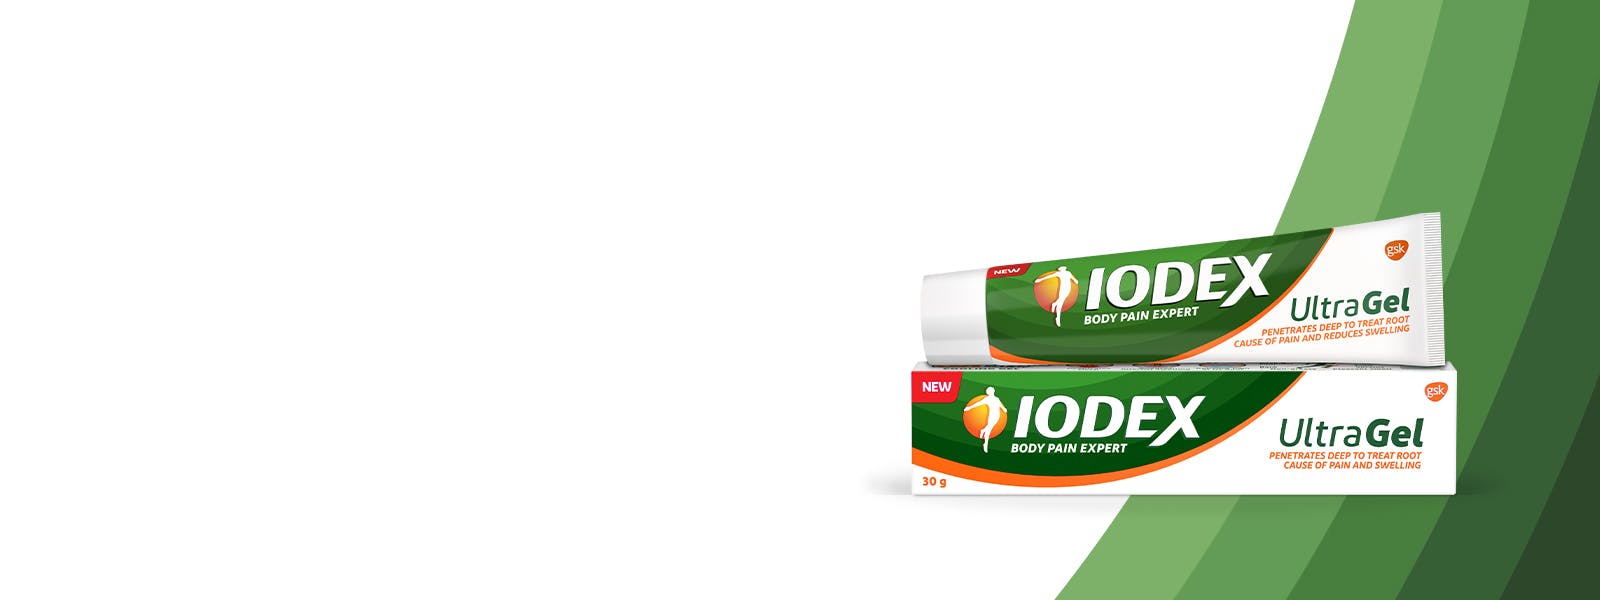 Iodex UltraGel for joint and back pain relief product